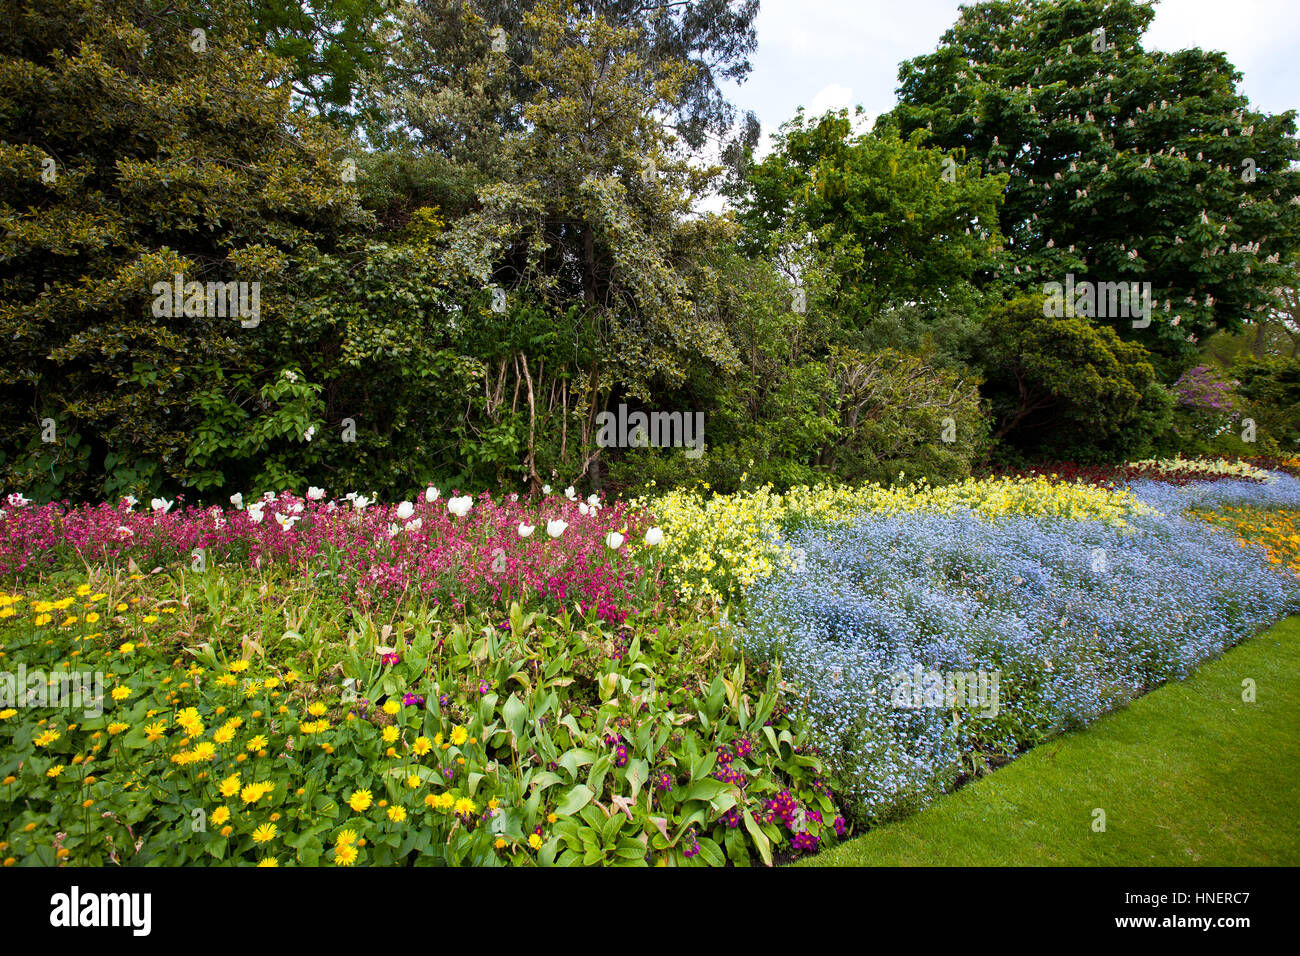 Large flower bed and trees Stock Photo